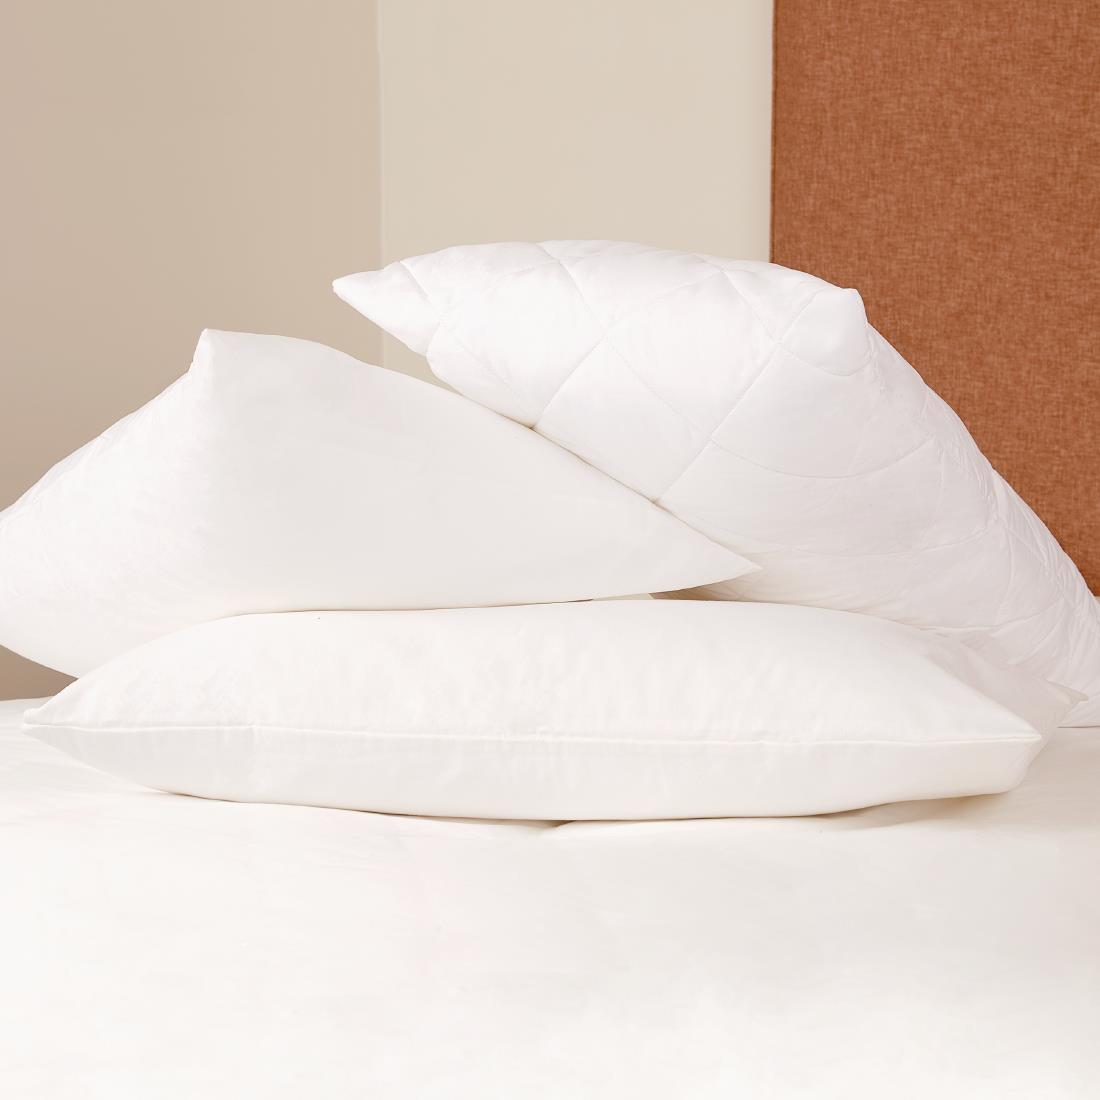 Mitre Luxury Pillowshield Pillow Protectors (Pack of 2) - HD055  - 3